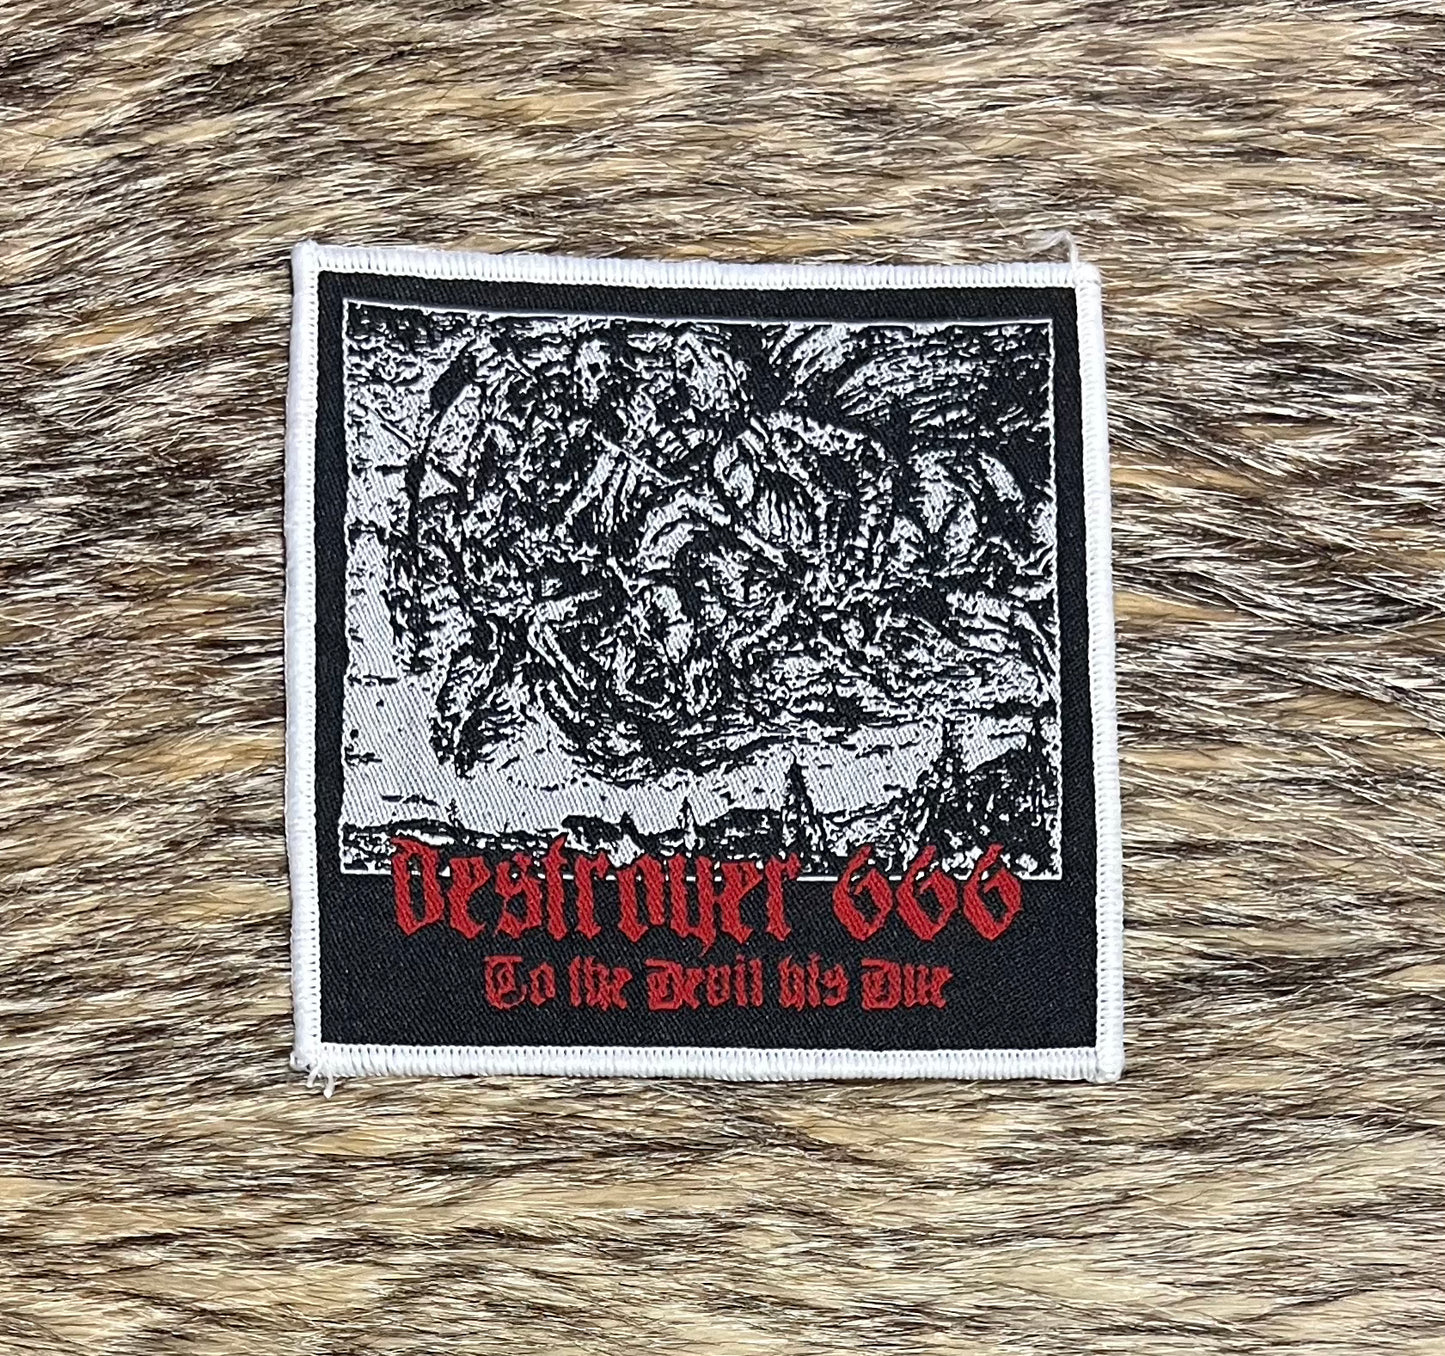 Destroyer 666 - To The Devil His Due Patch